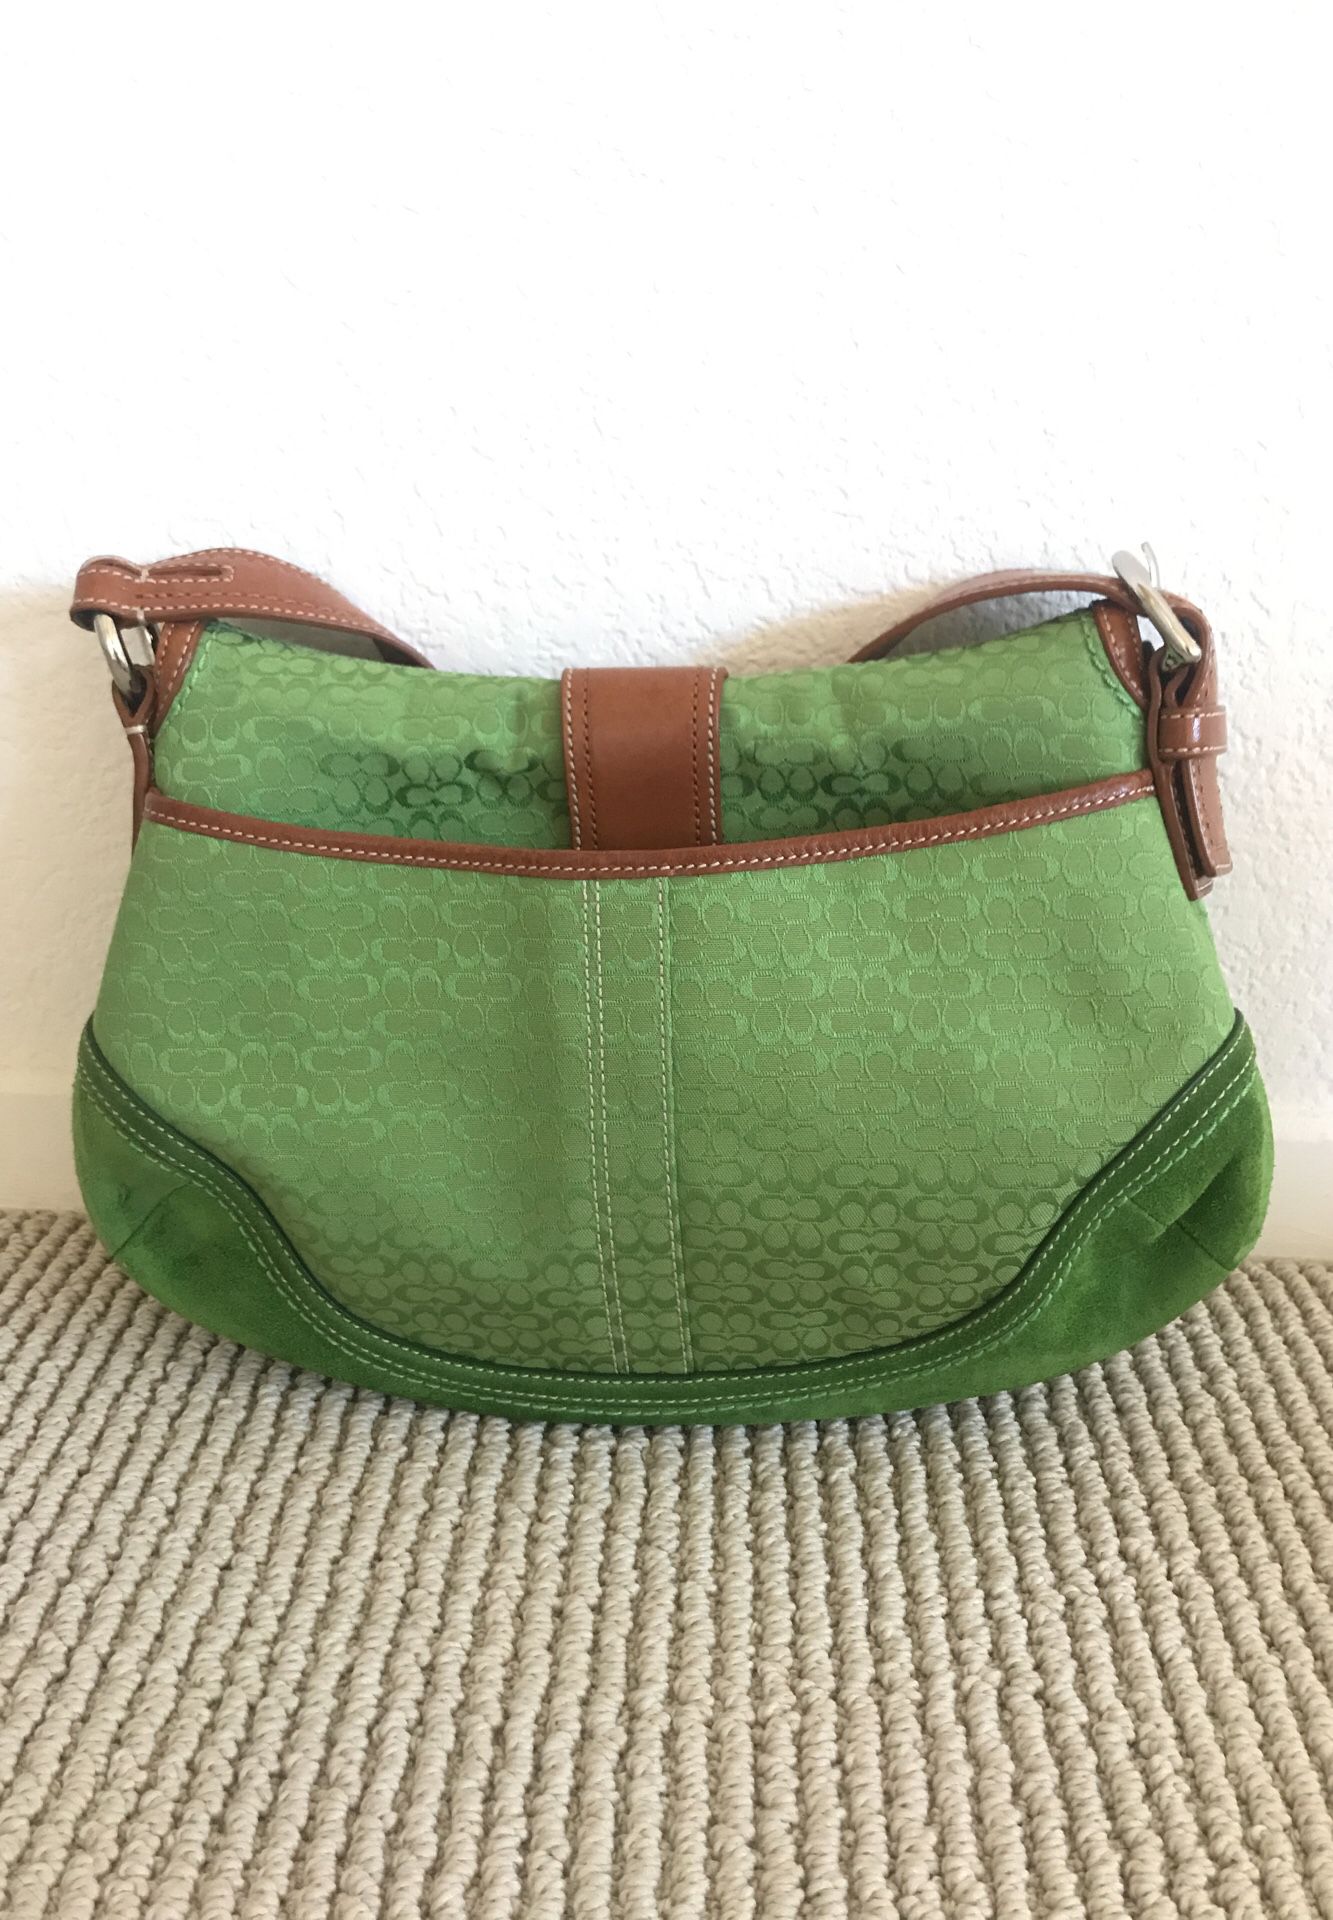 Accoutrements Bowling Bag Purse for Sale in San Diego, CA - OfferUp